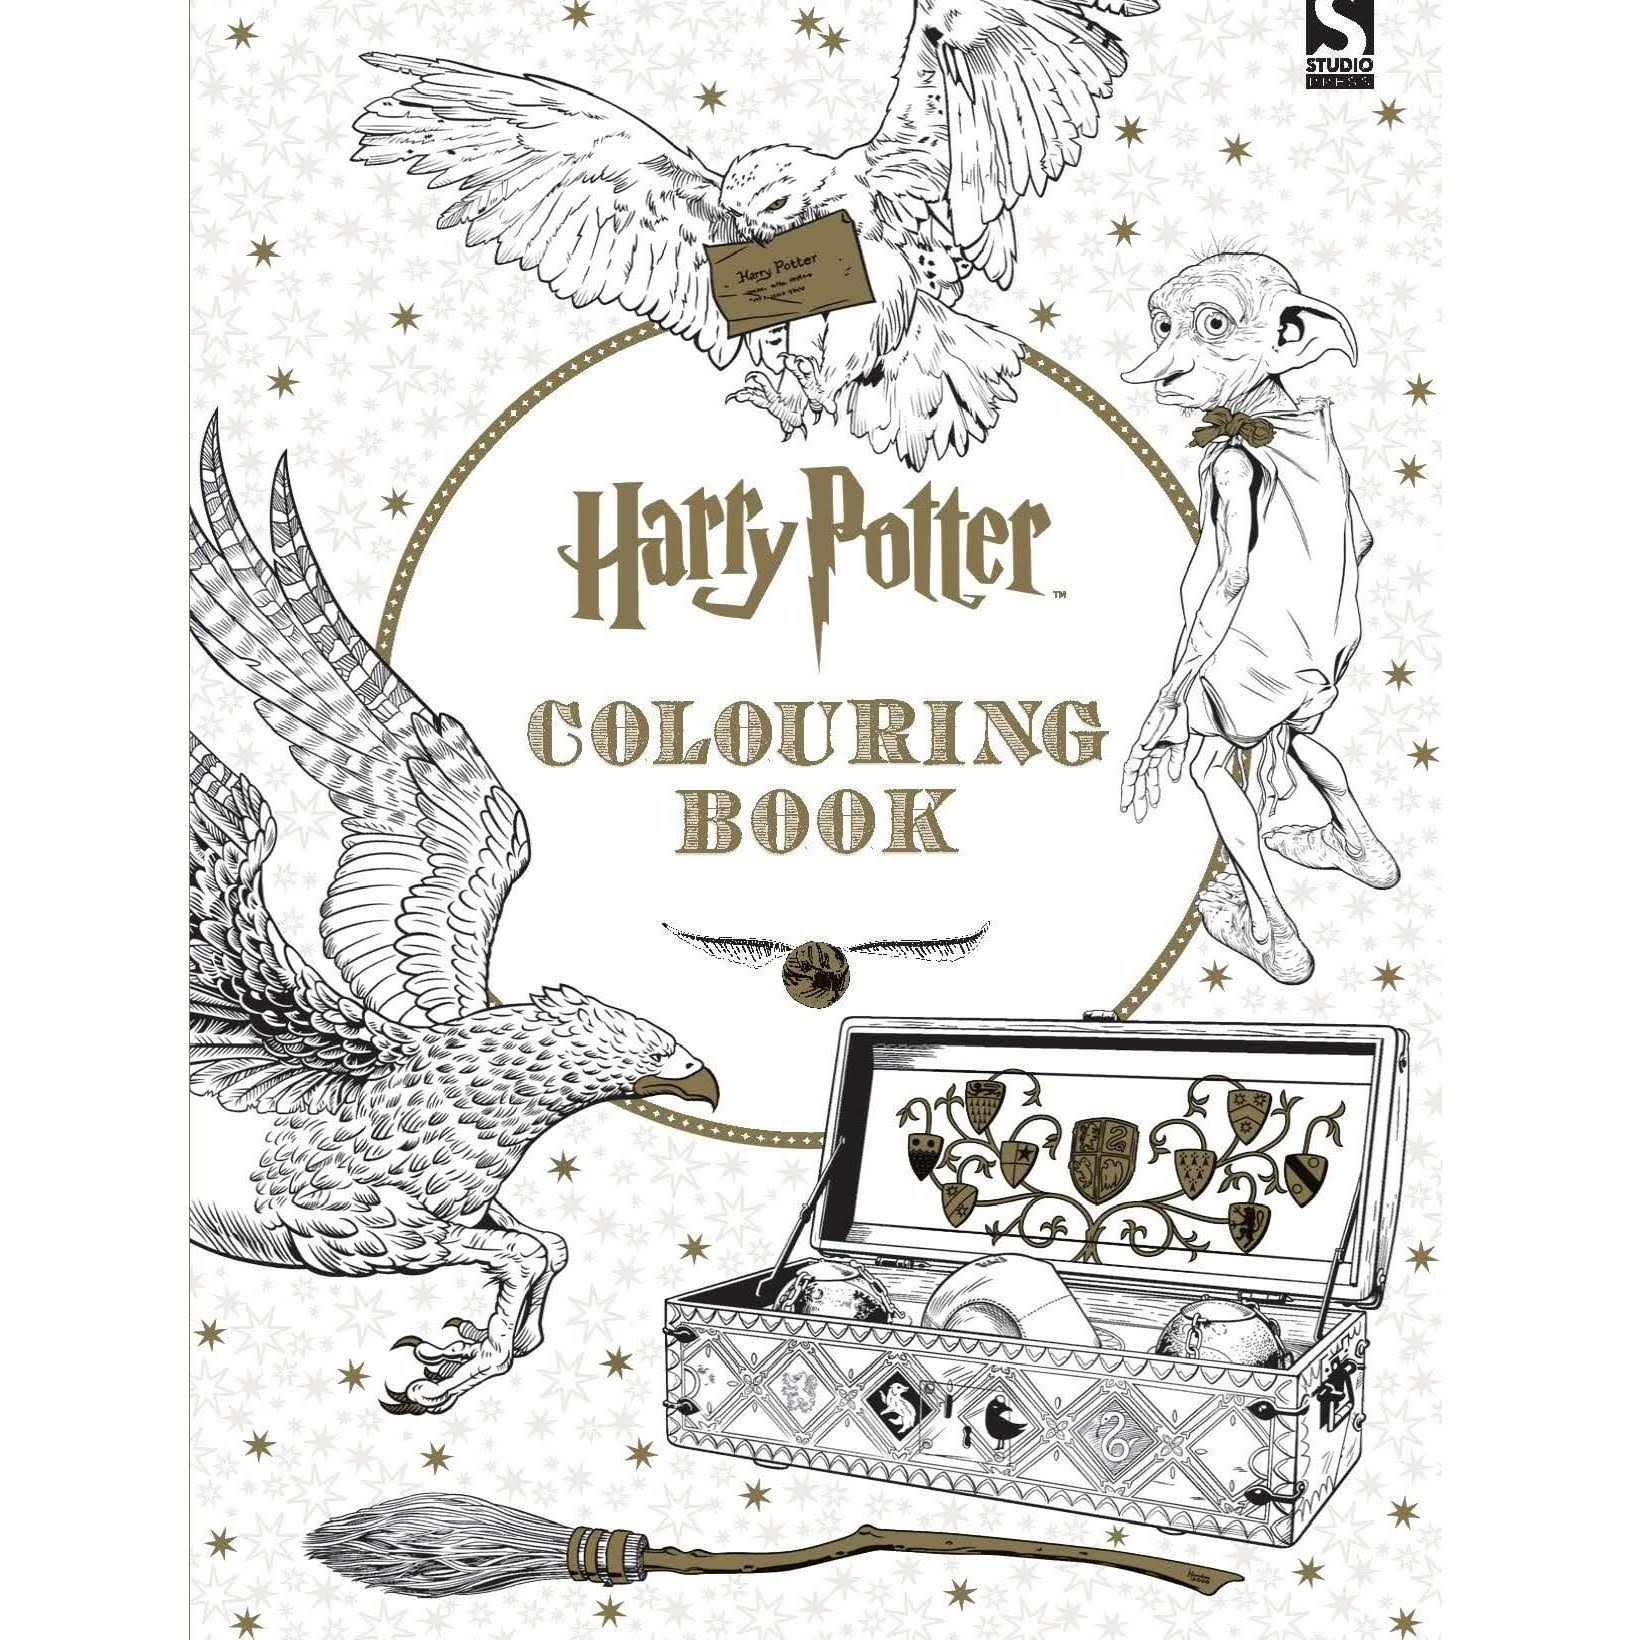 Harry Potter Colouring Book [Book]